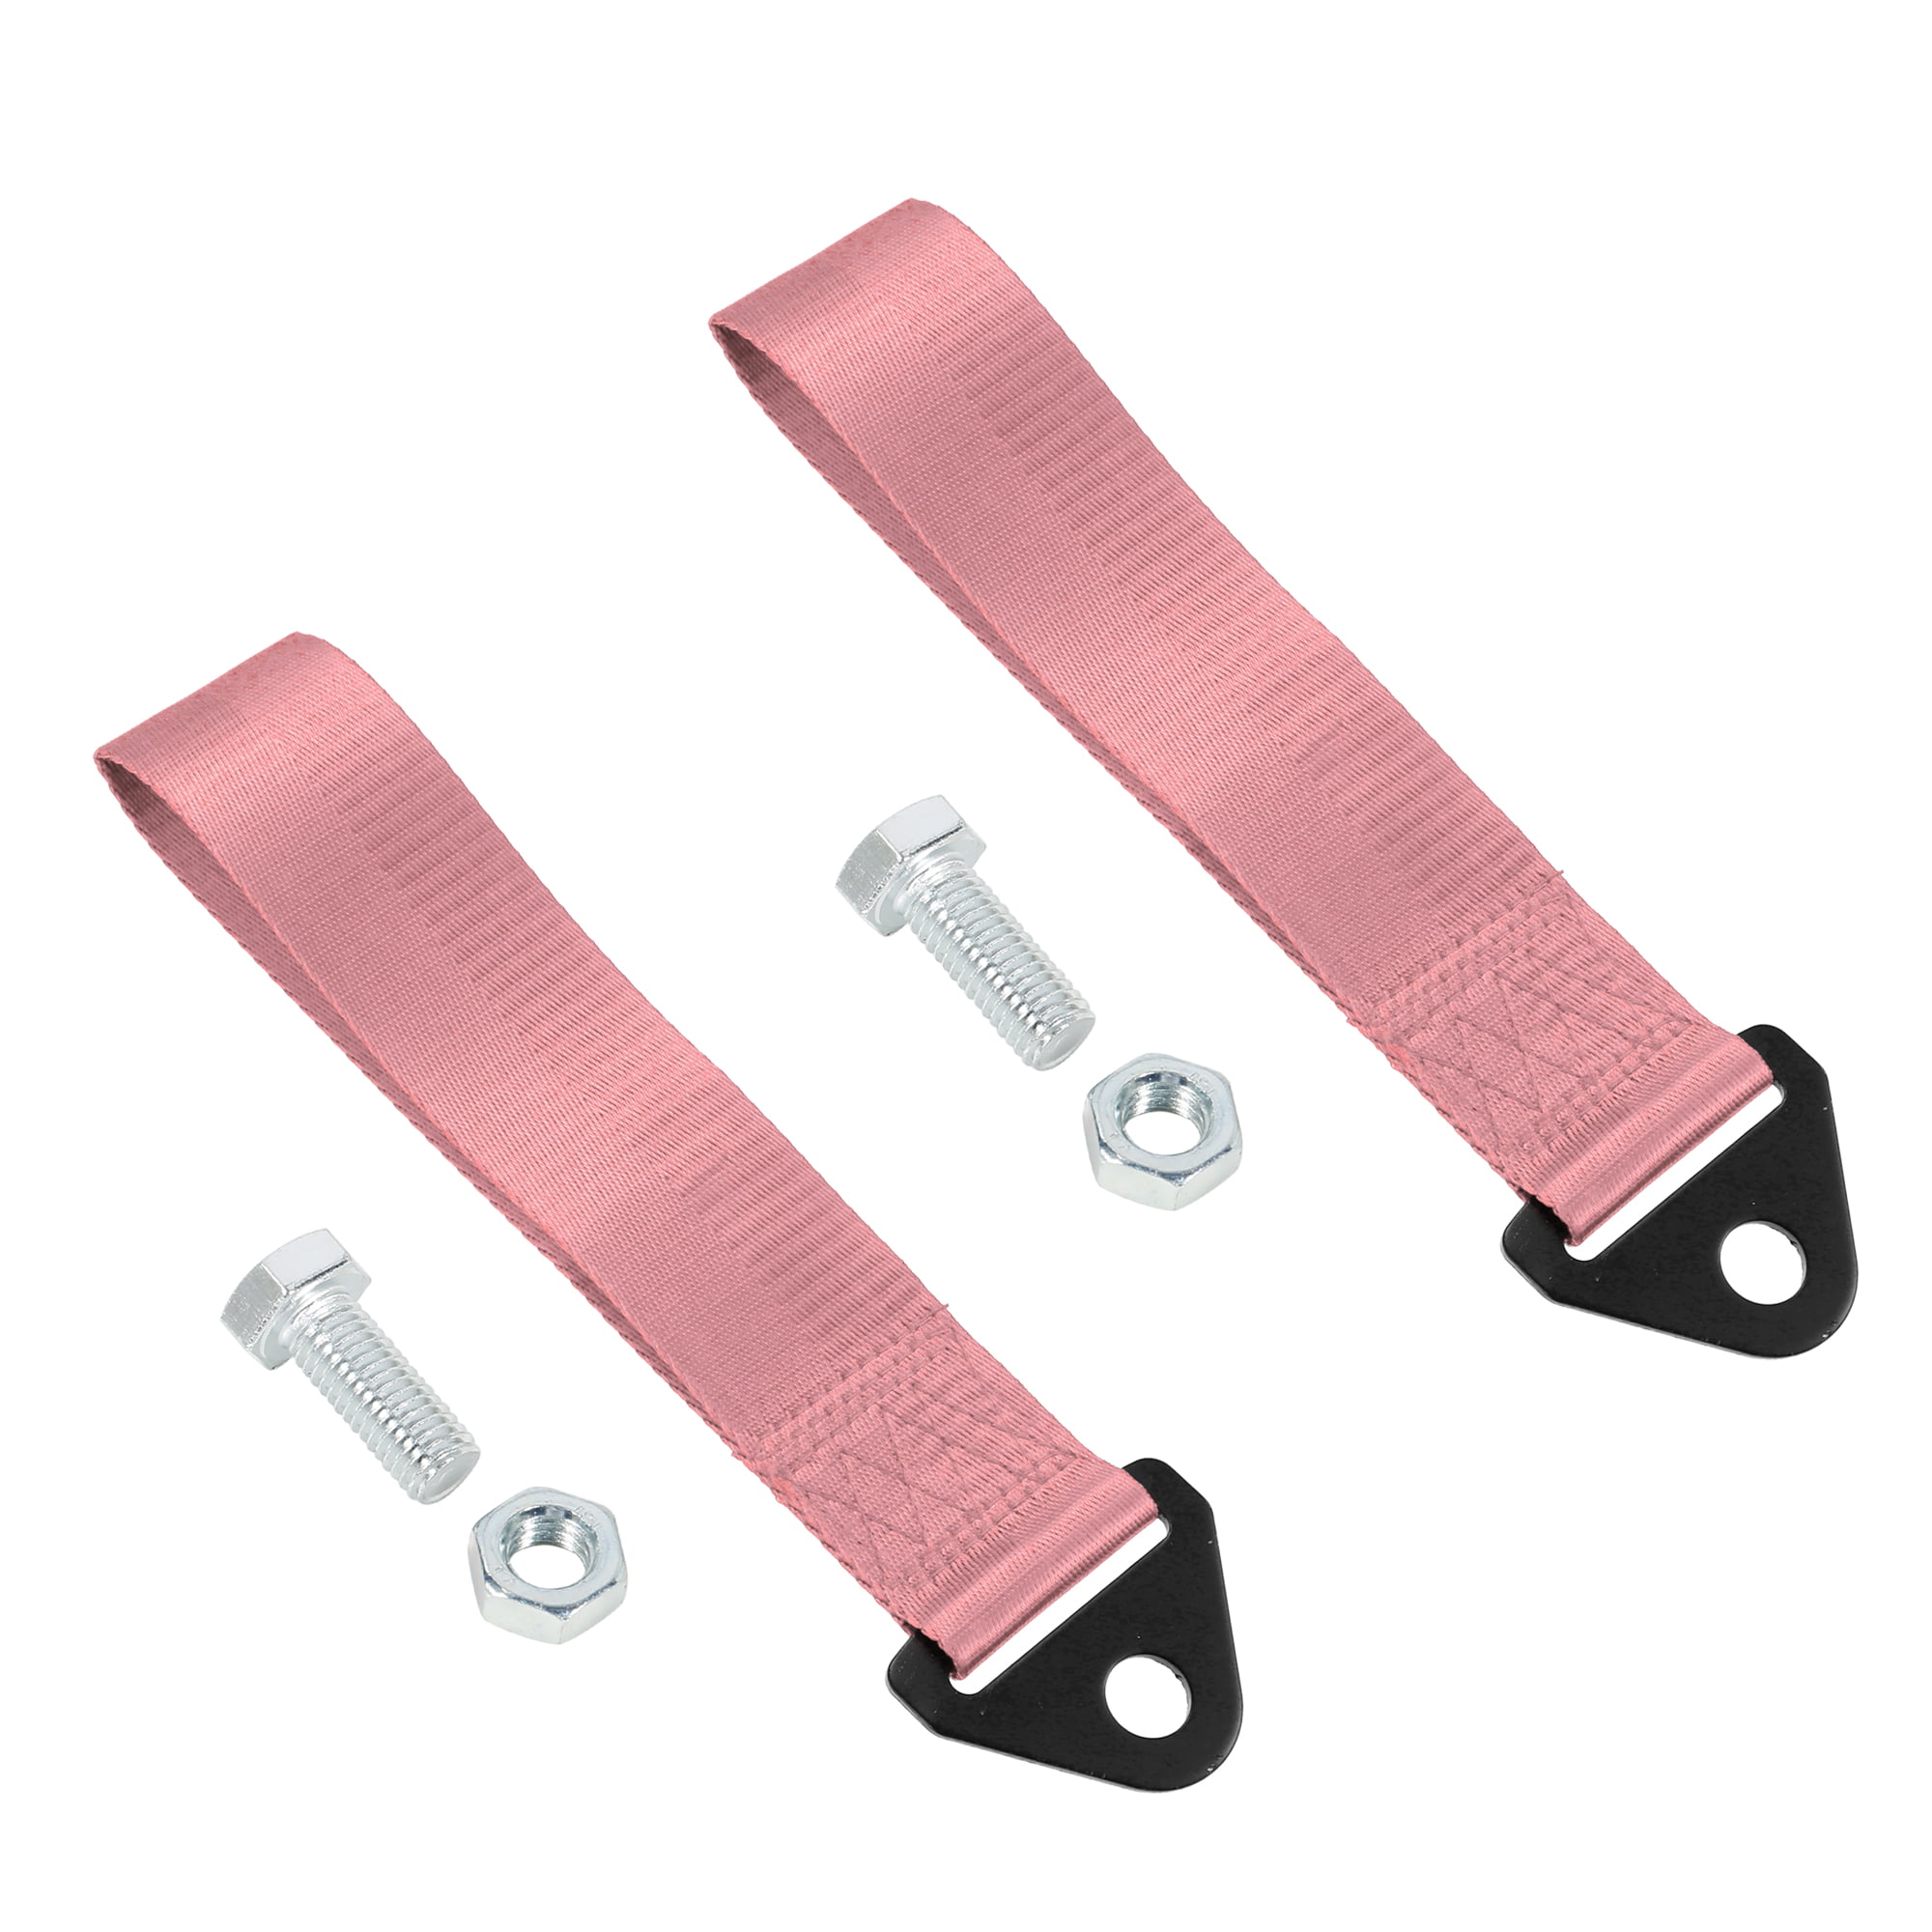 2 Pcs Universal Car Tow Towing Hook Bumper Trailer Belt Strap with